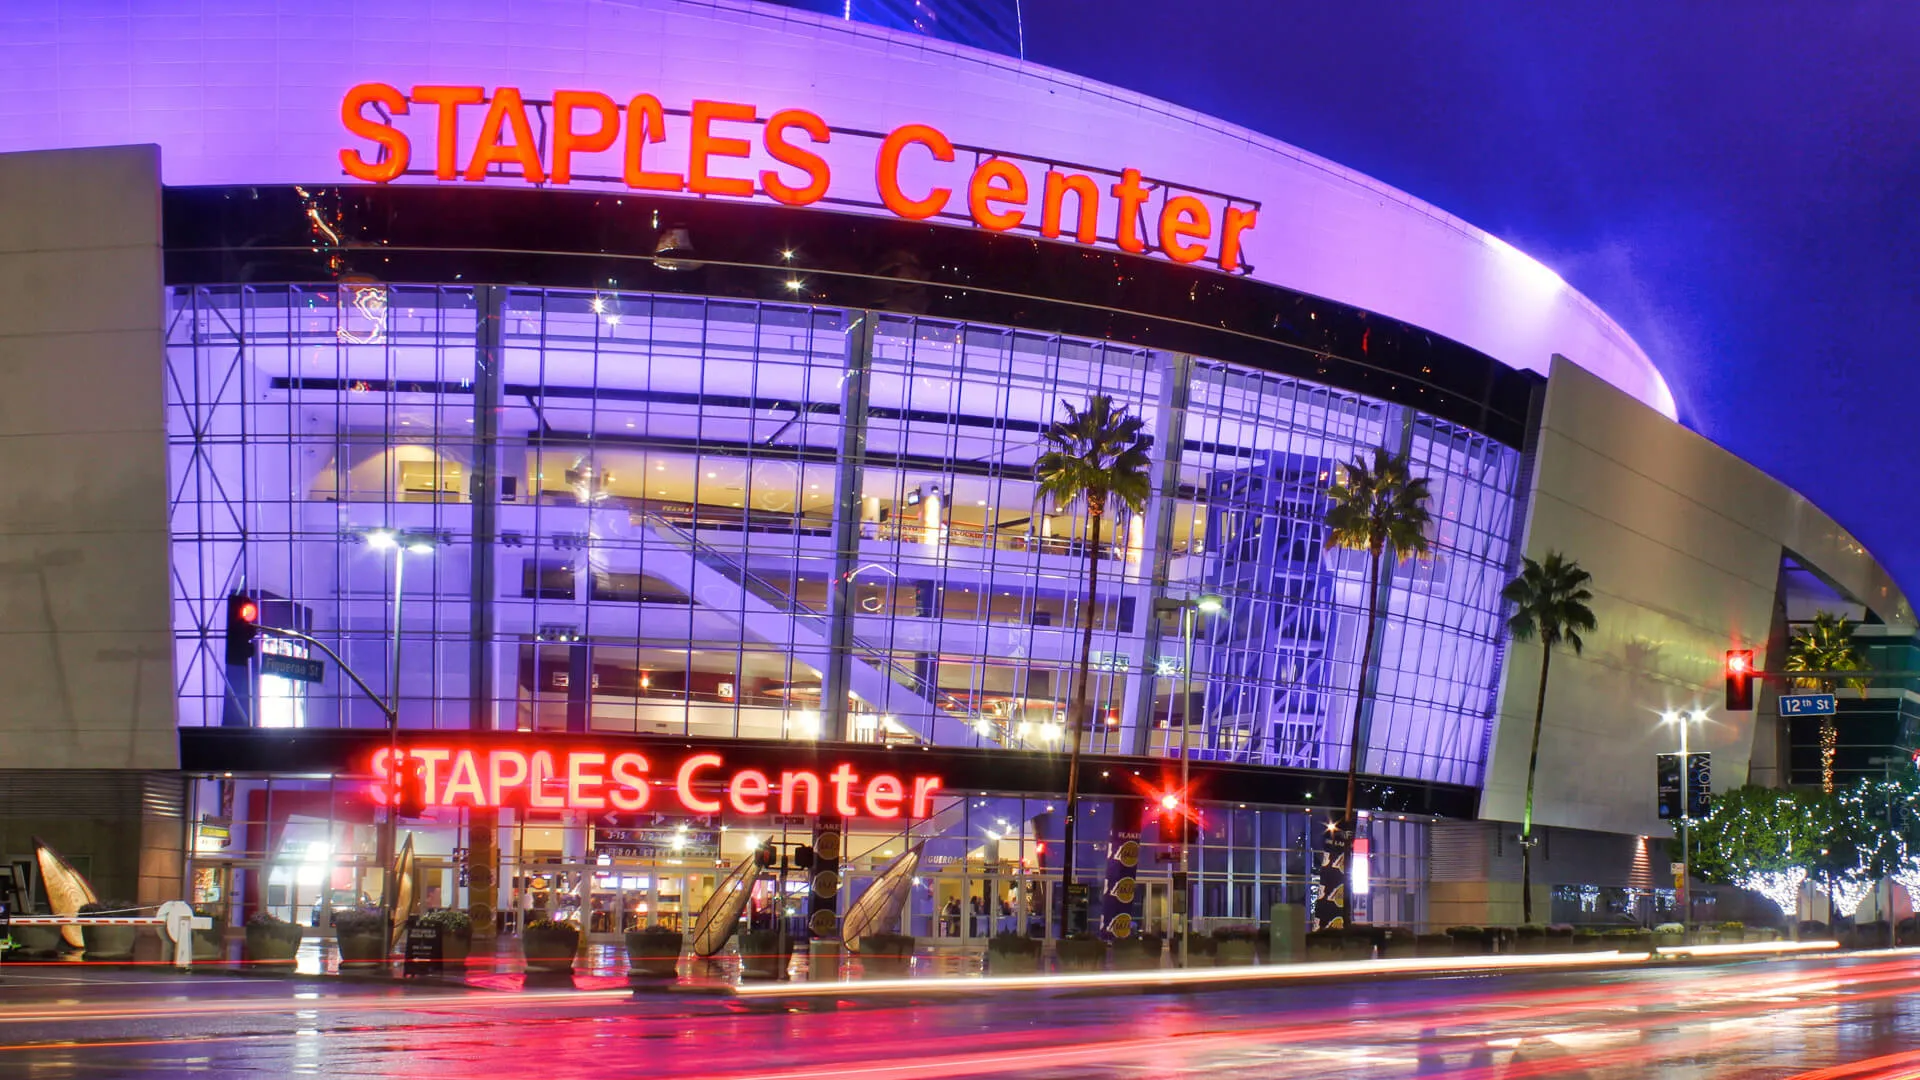 Staples Center Los Angeles Lakers Clippers stadium